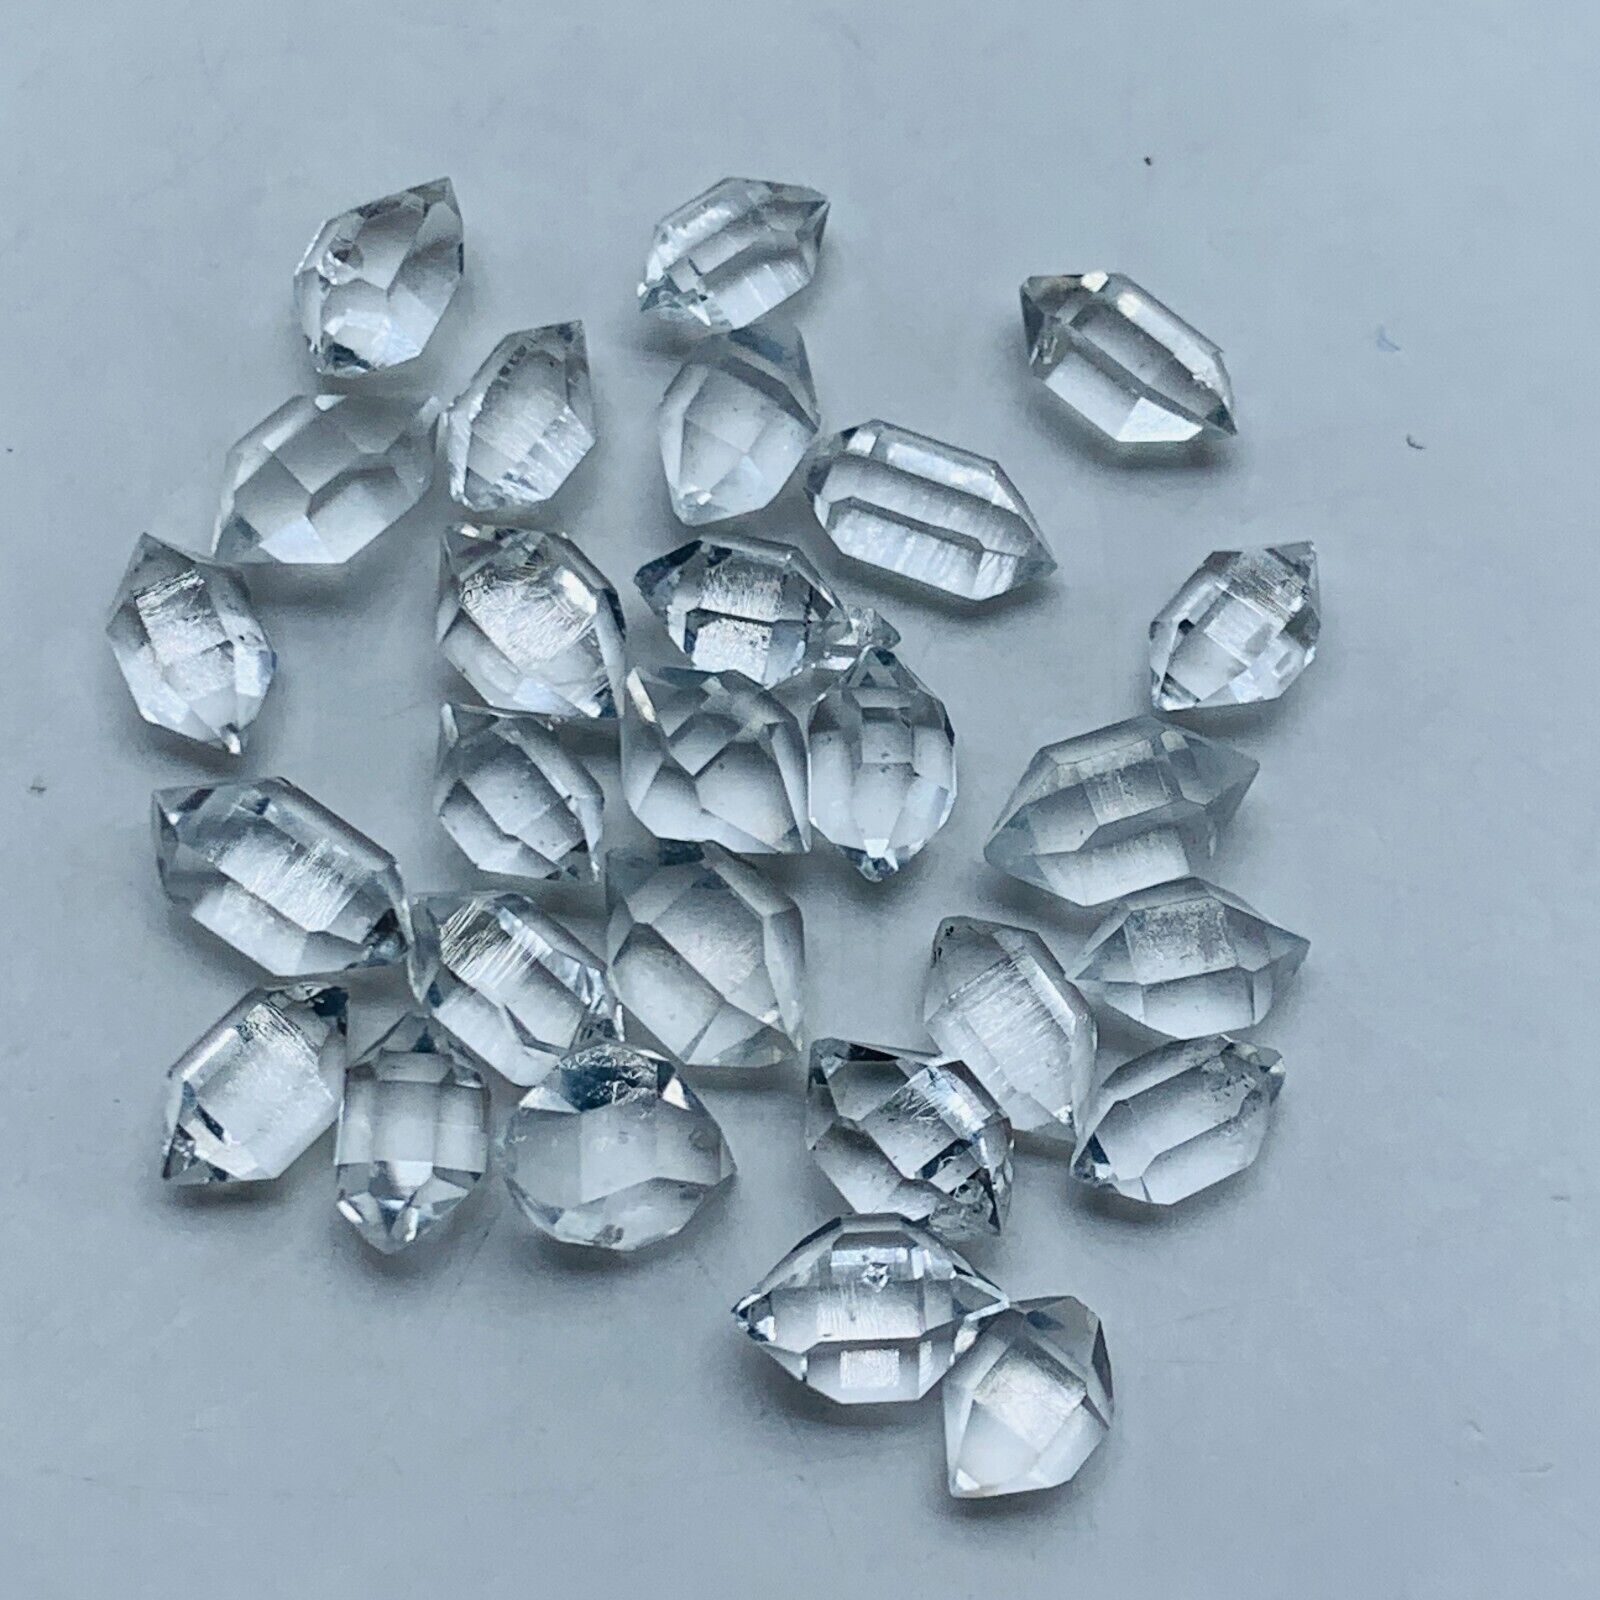 27pc Herkimer Diamond AAA small 5mm to 8mm Top gem crystal From-NY 14ct